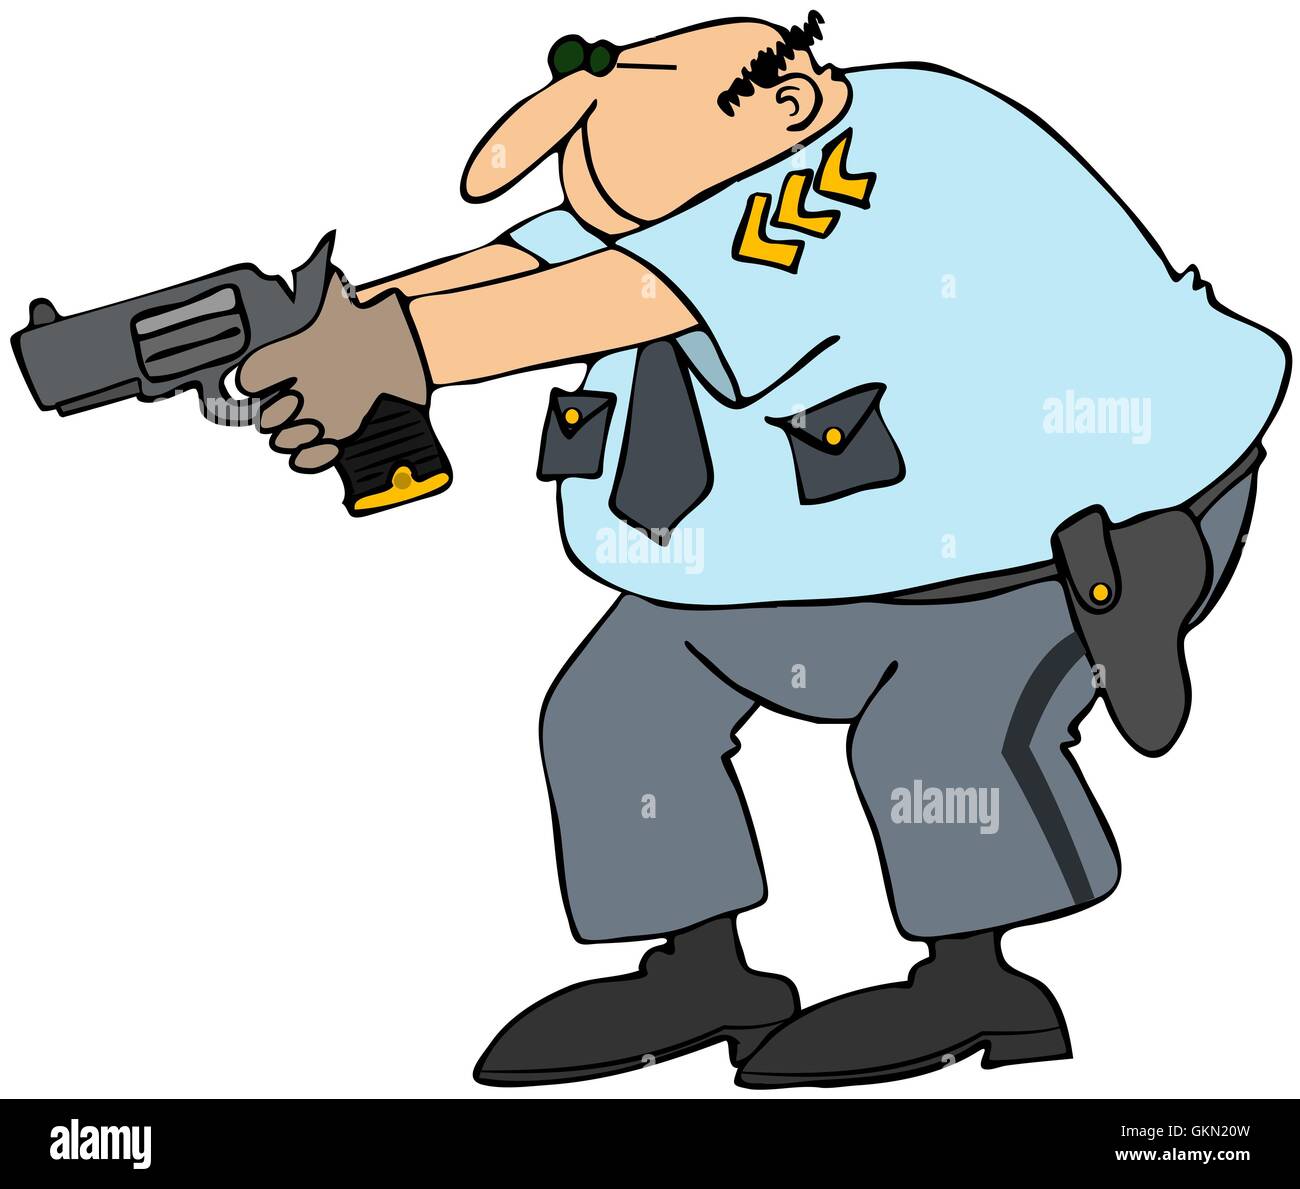 Cop with weapon drawn Stock Photo